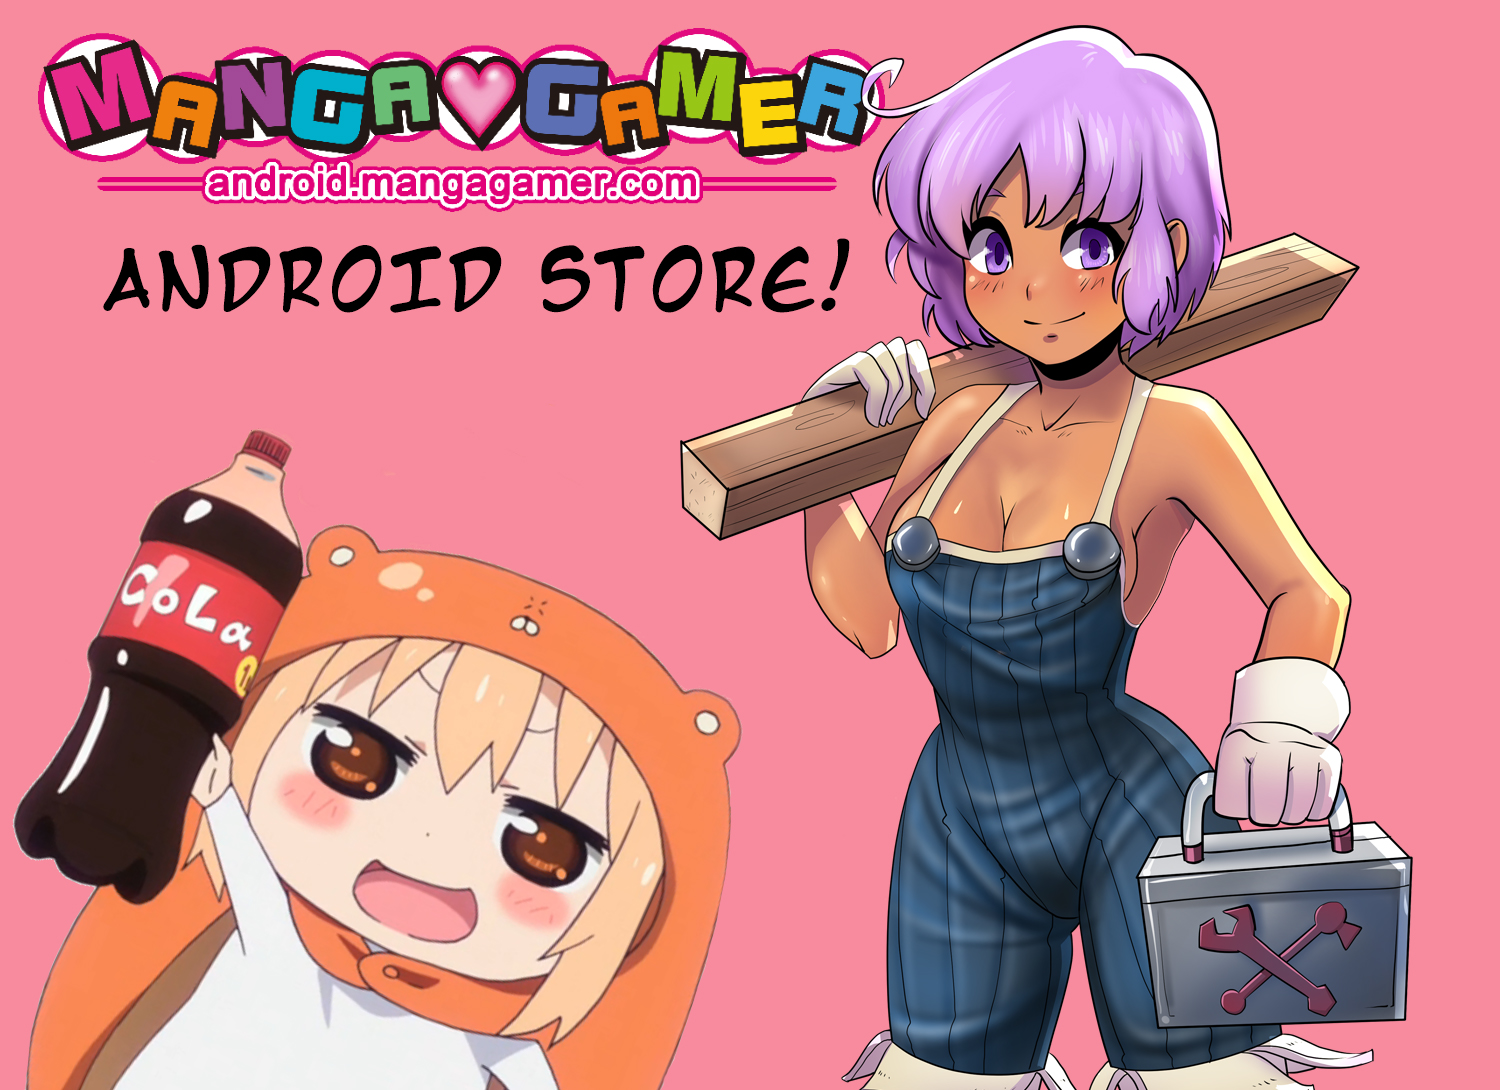 Mangagamer Hentai Game Store For Android Phones Launched - Hentai Reviews.